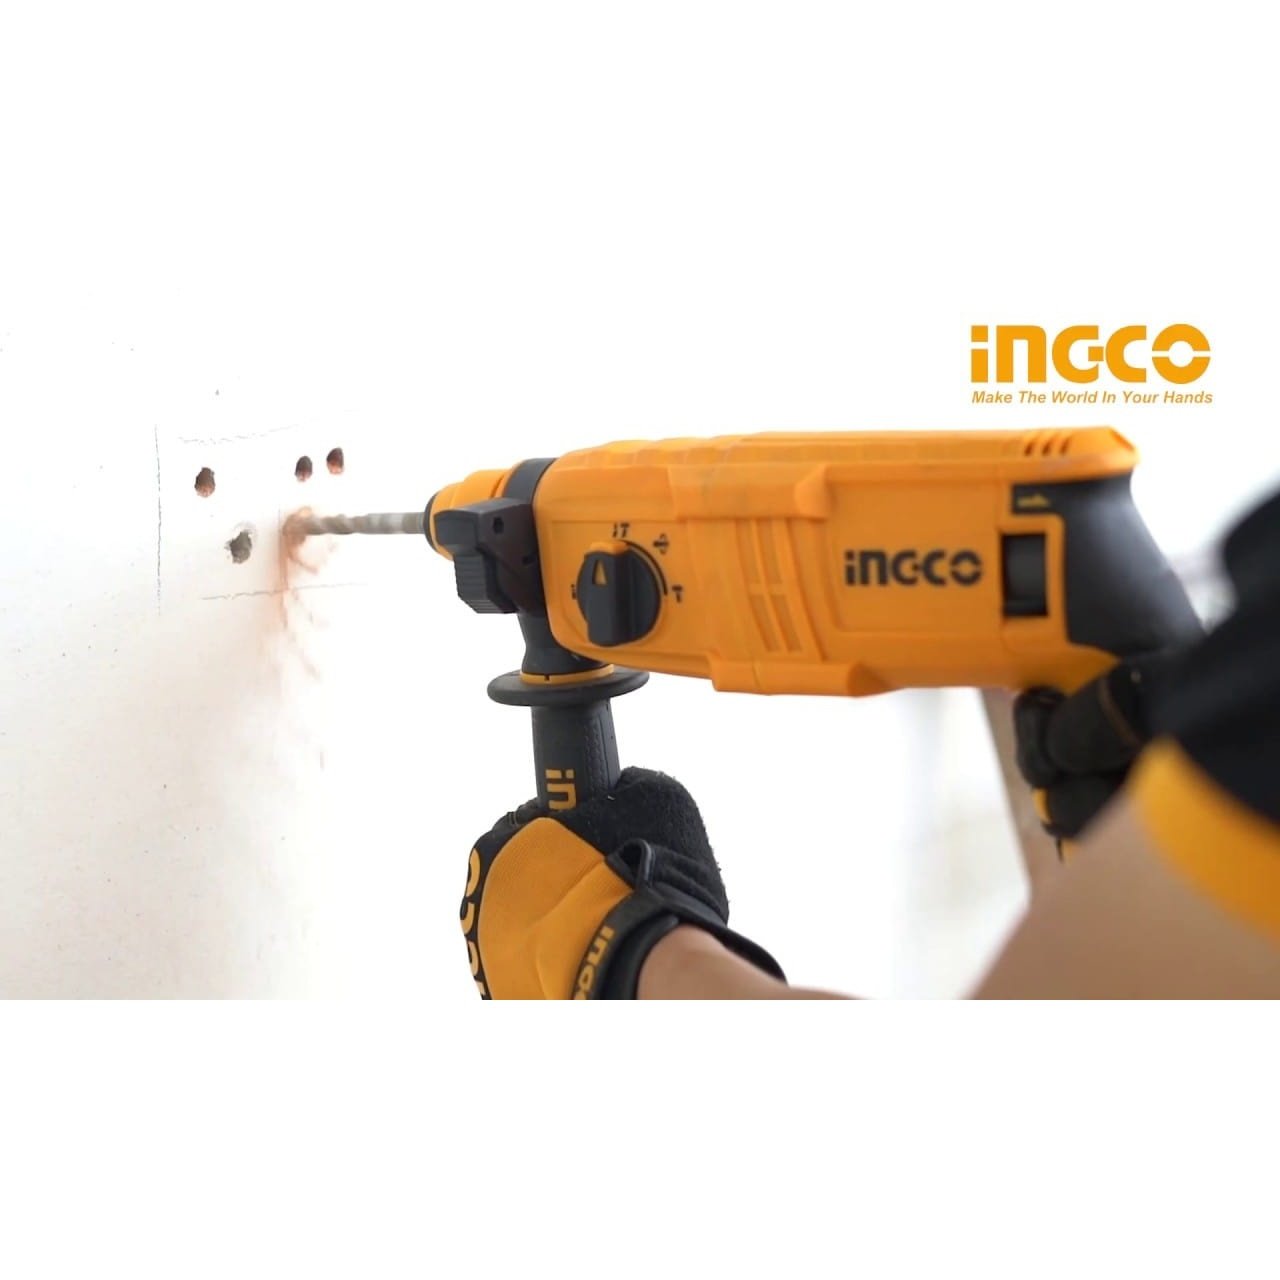 Ingco Rotary Hammer 650W - RGH6528 | Buy Online in Accra, Ghana - Supply Master Drill Buy Tools hardware Building materials